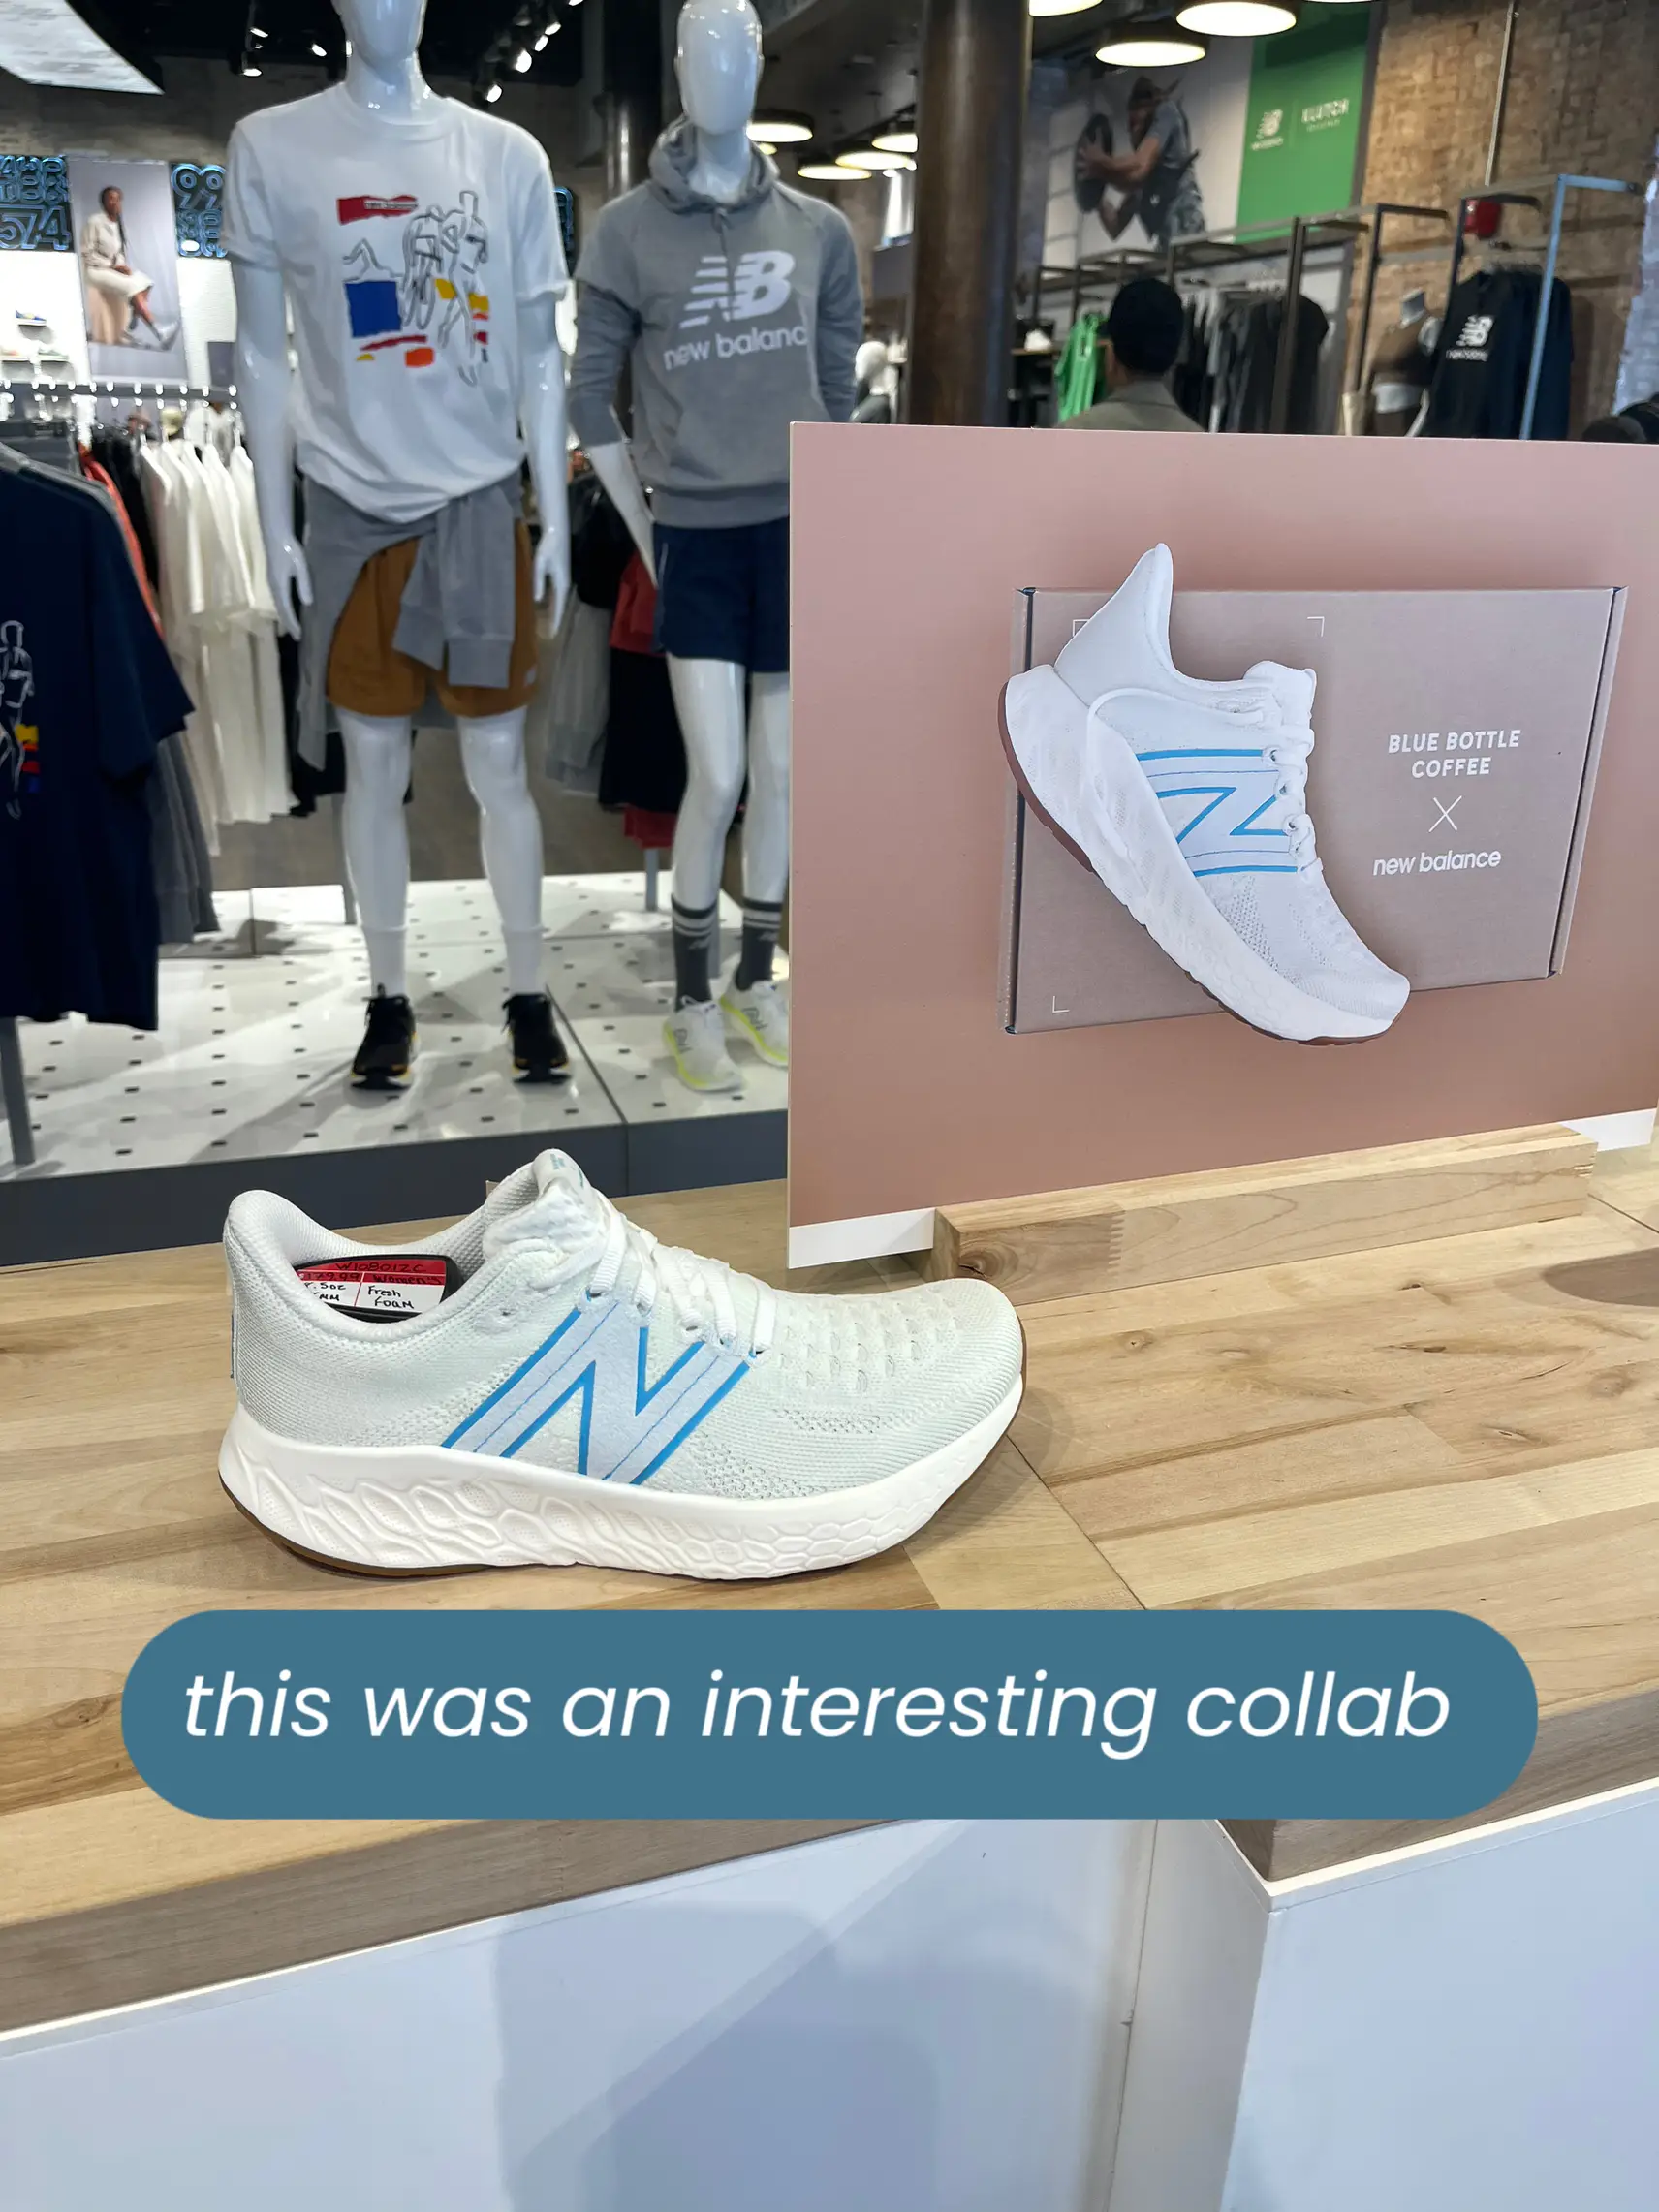 shop with me @ New Balance | Gallery posted by Isabelle | Lemon8